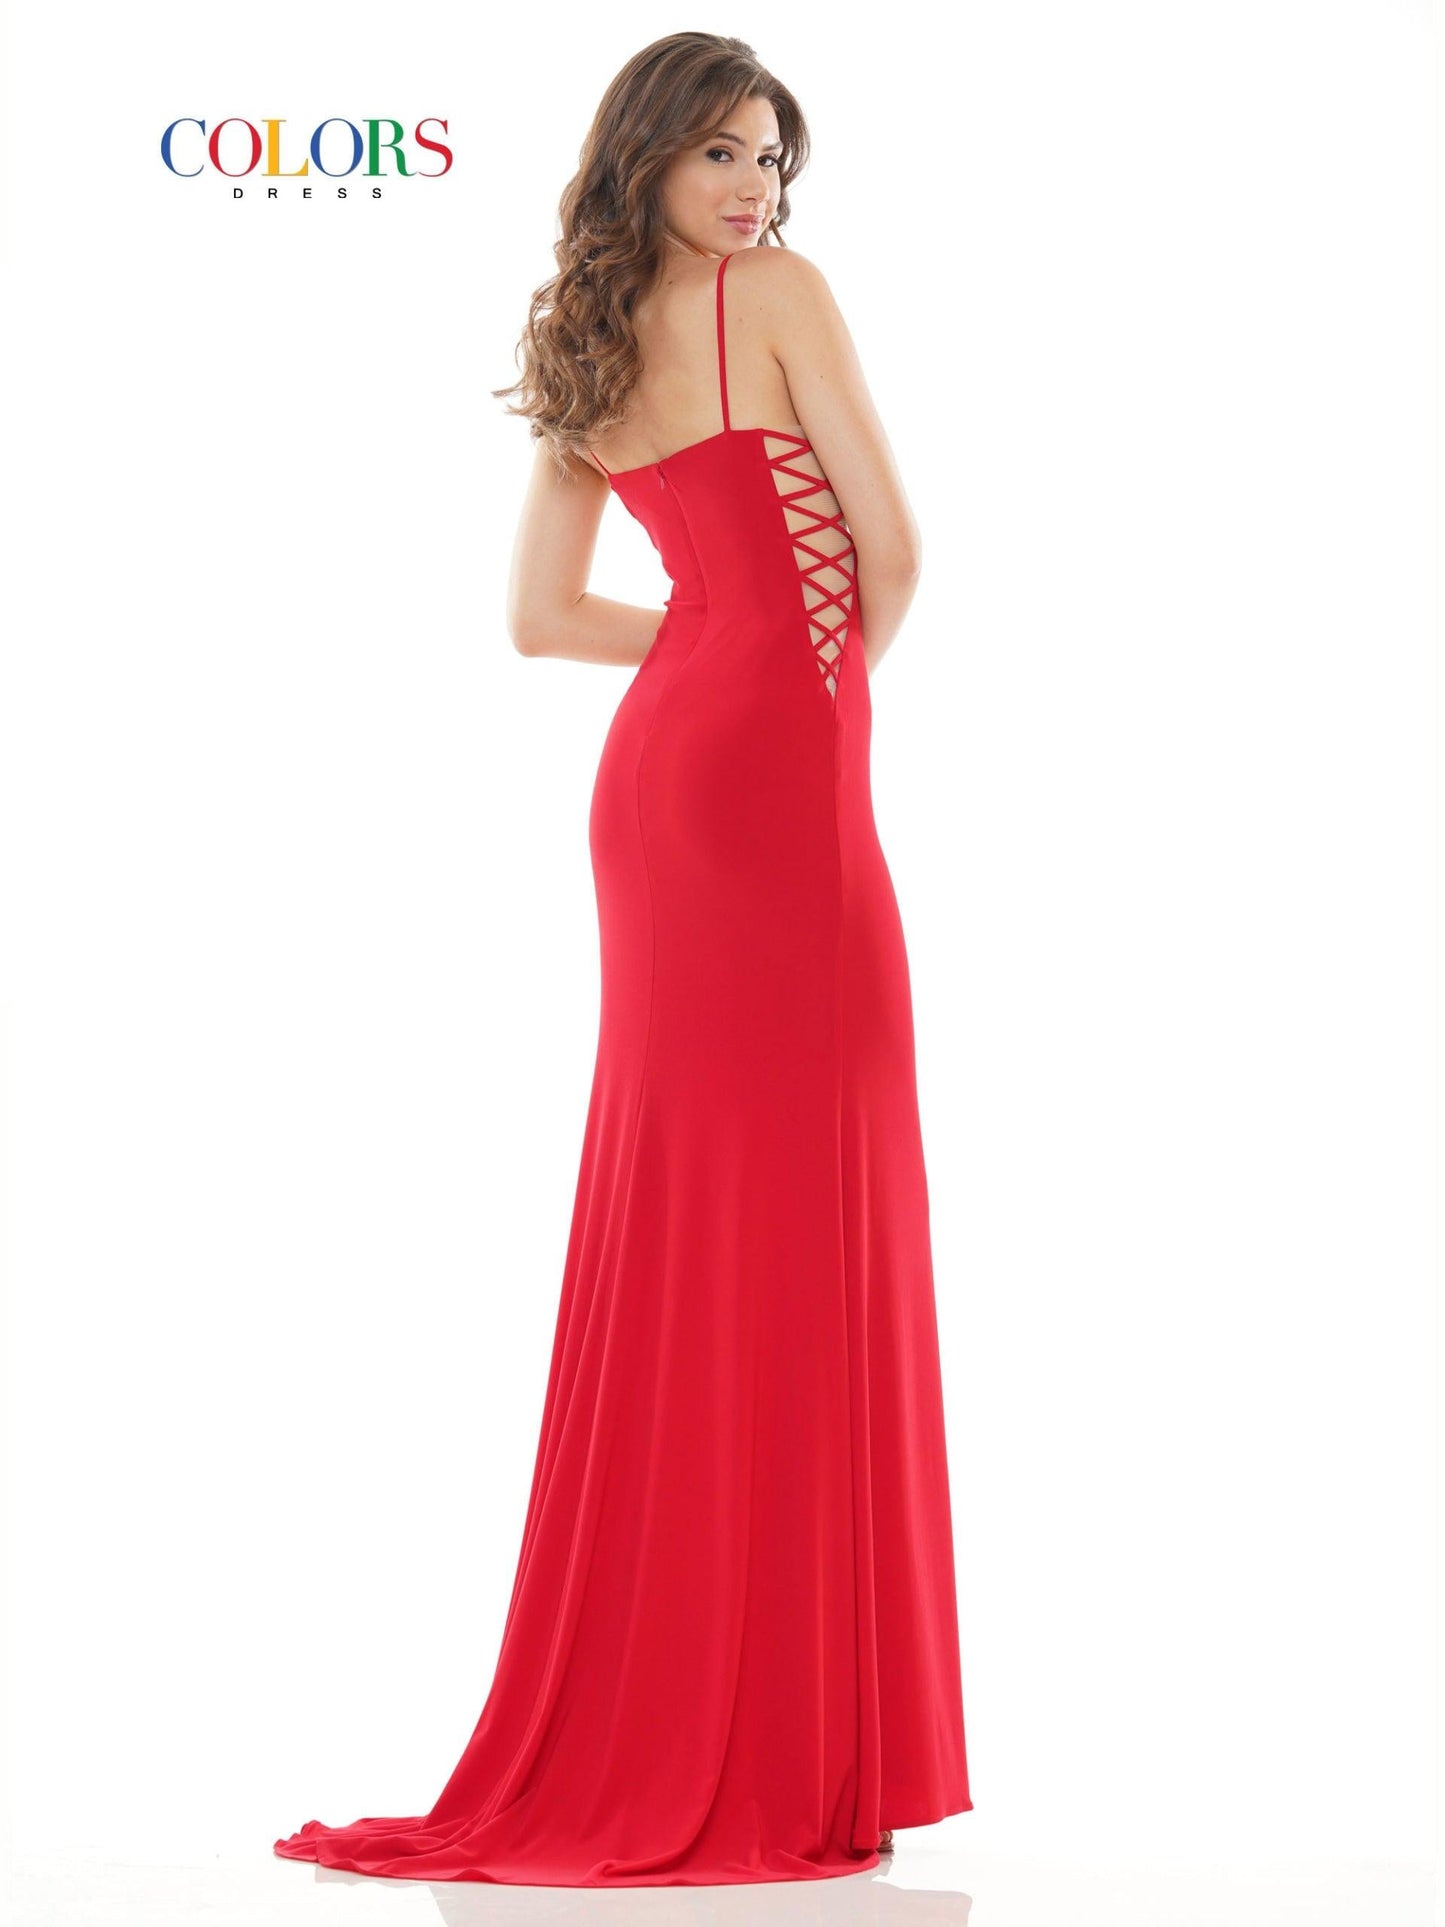 Colors Prom Long Formal Mermaid Fit Dress 2755 - The Dress Outlet